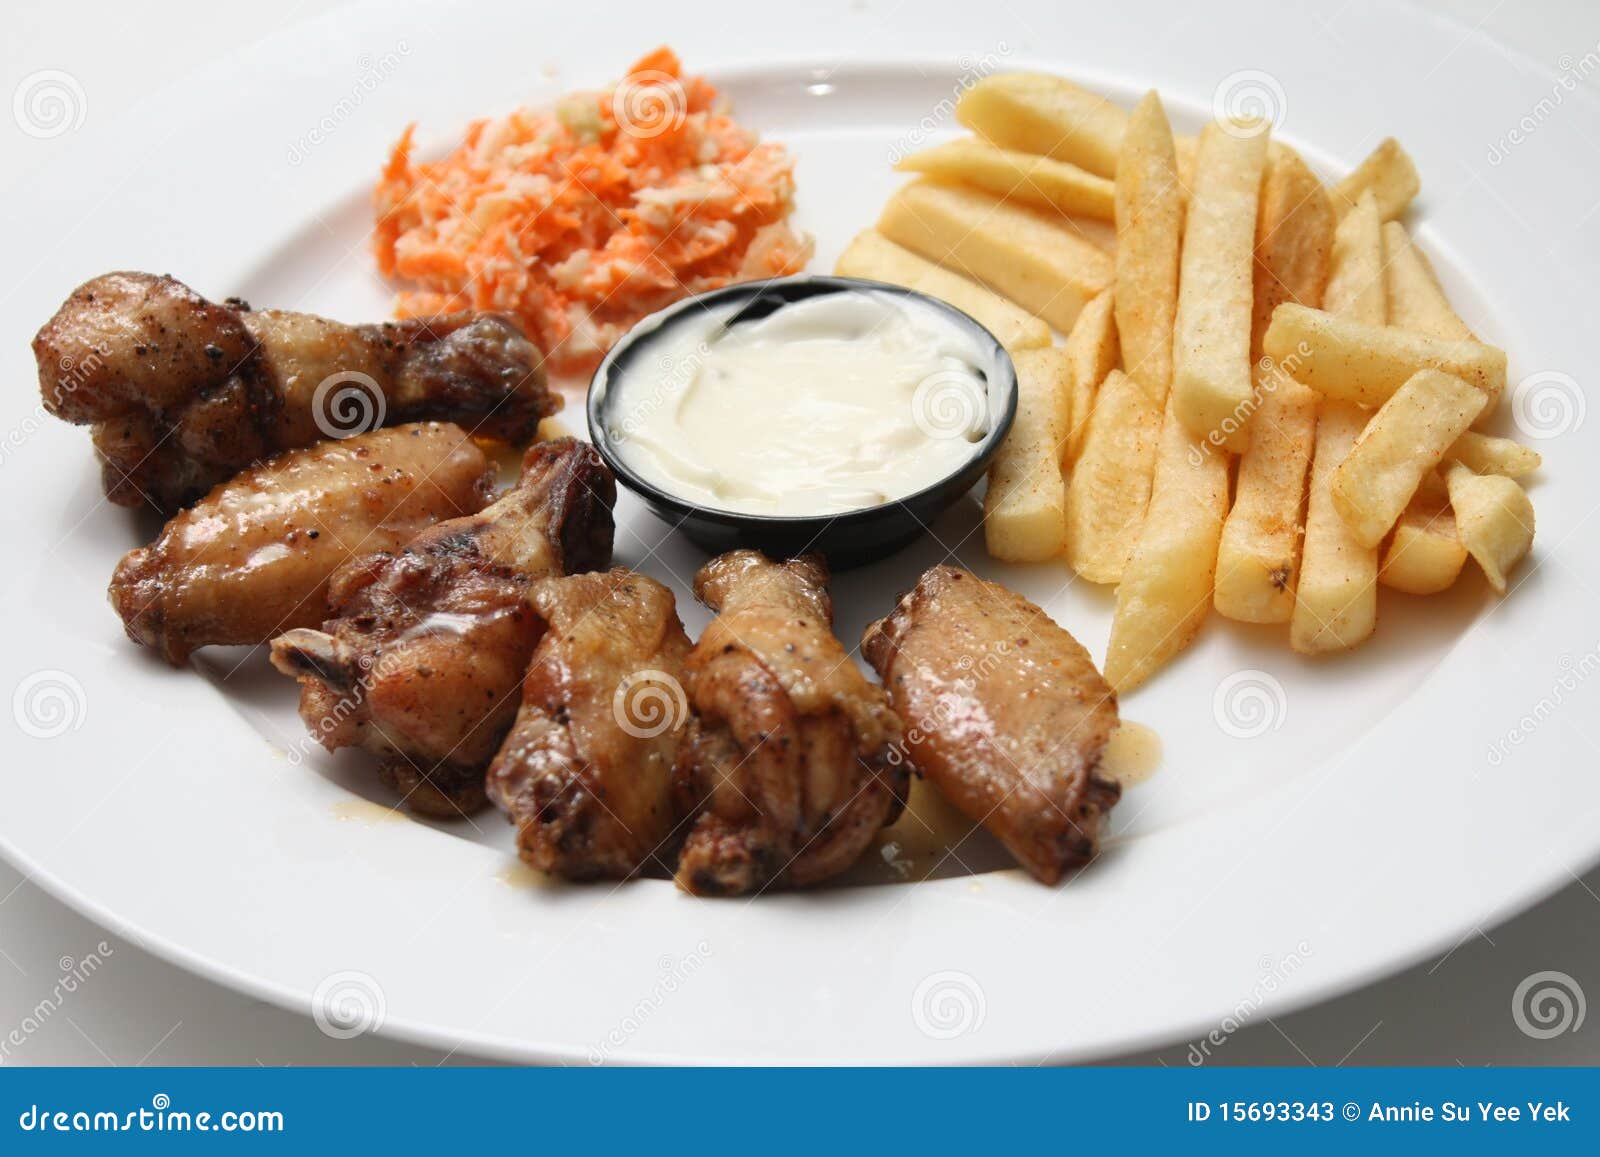 Chicken Wings With Fries Stock Photos - Image: 15693343